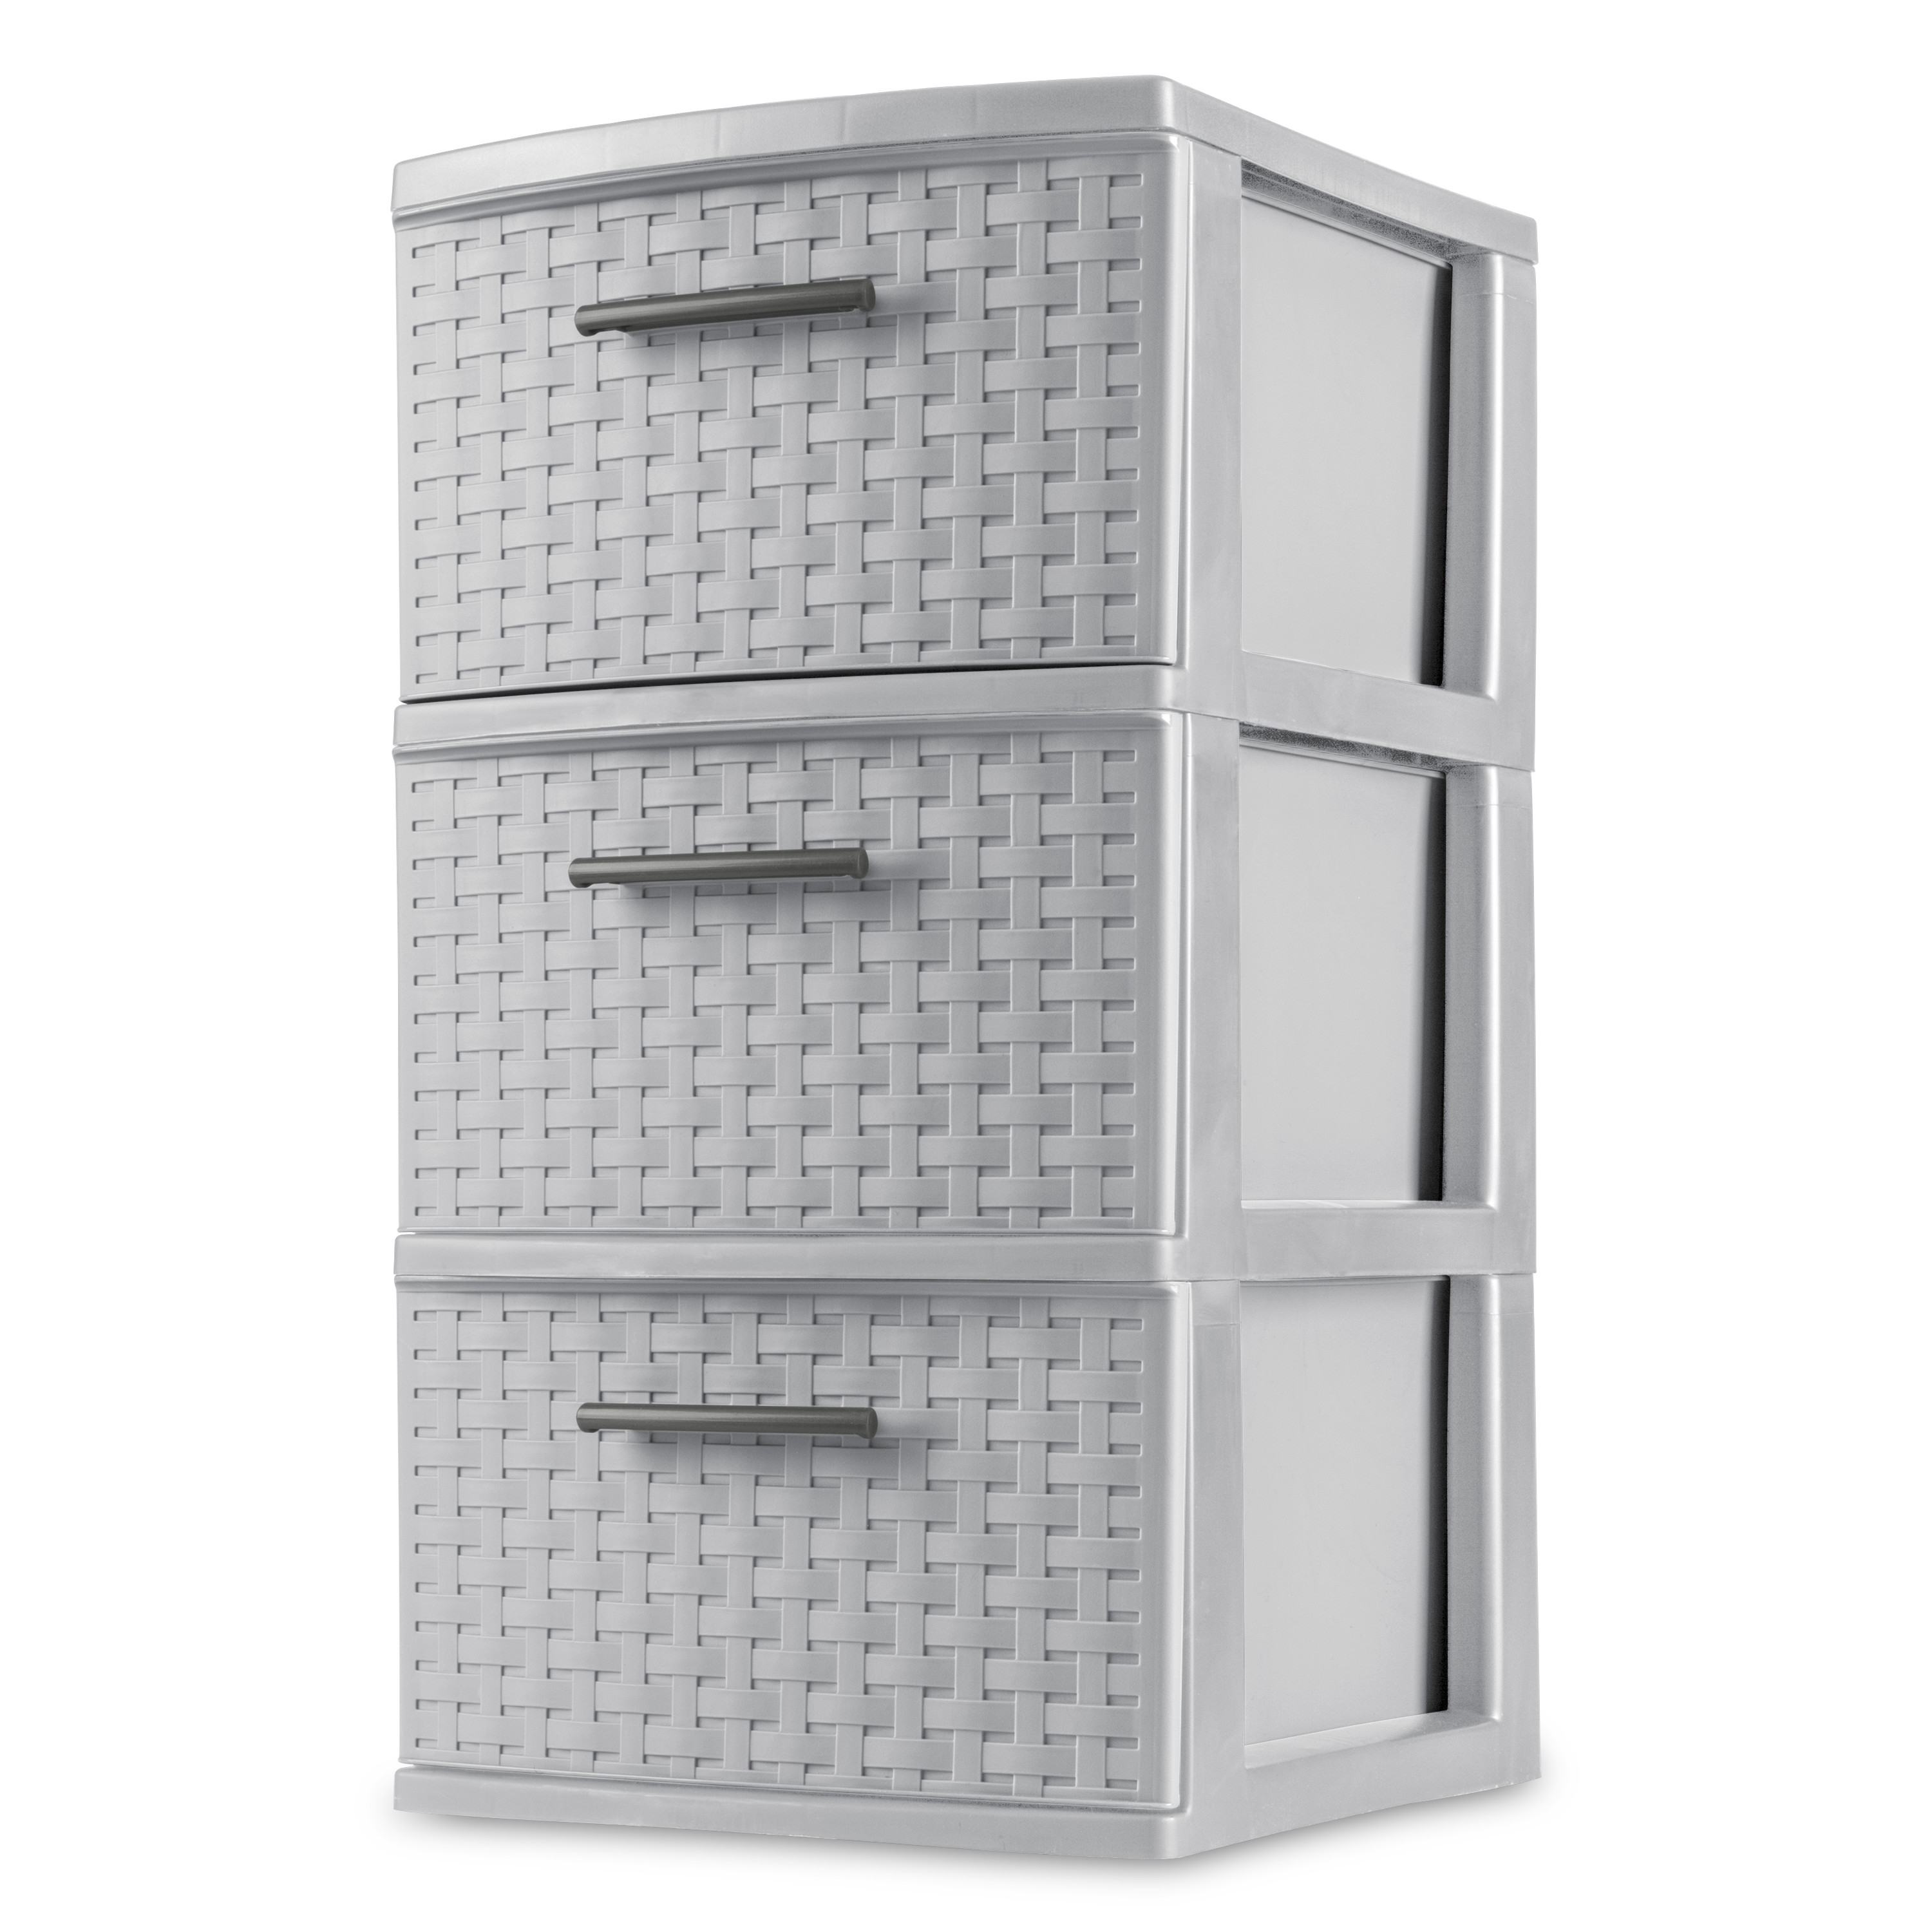 Sterilite 3 Drawer Weave Tower Plastic, Cement - image 1 of 8